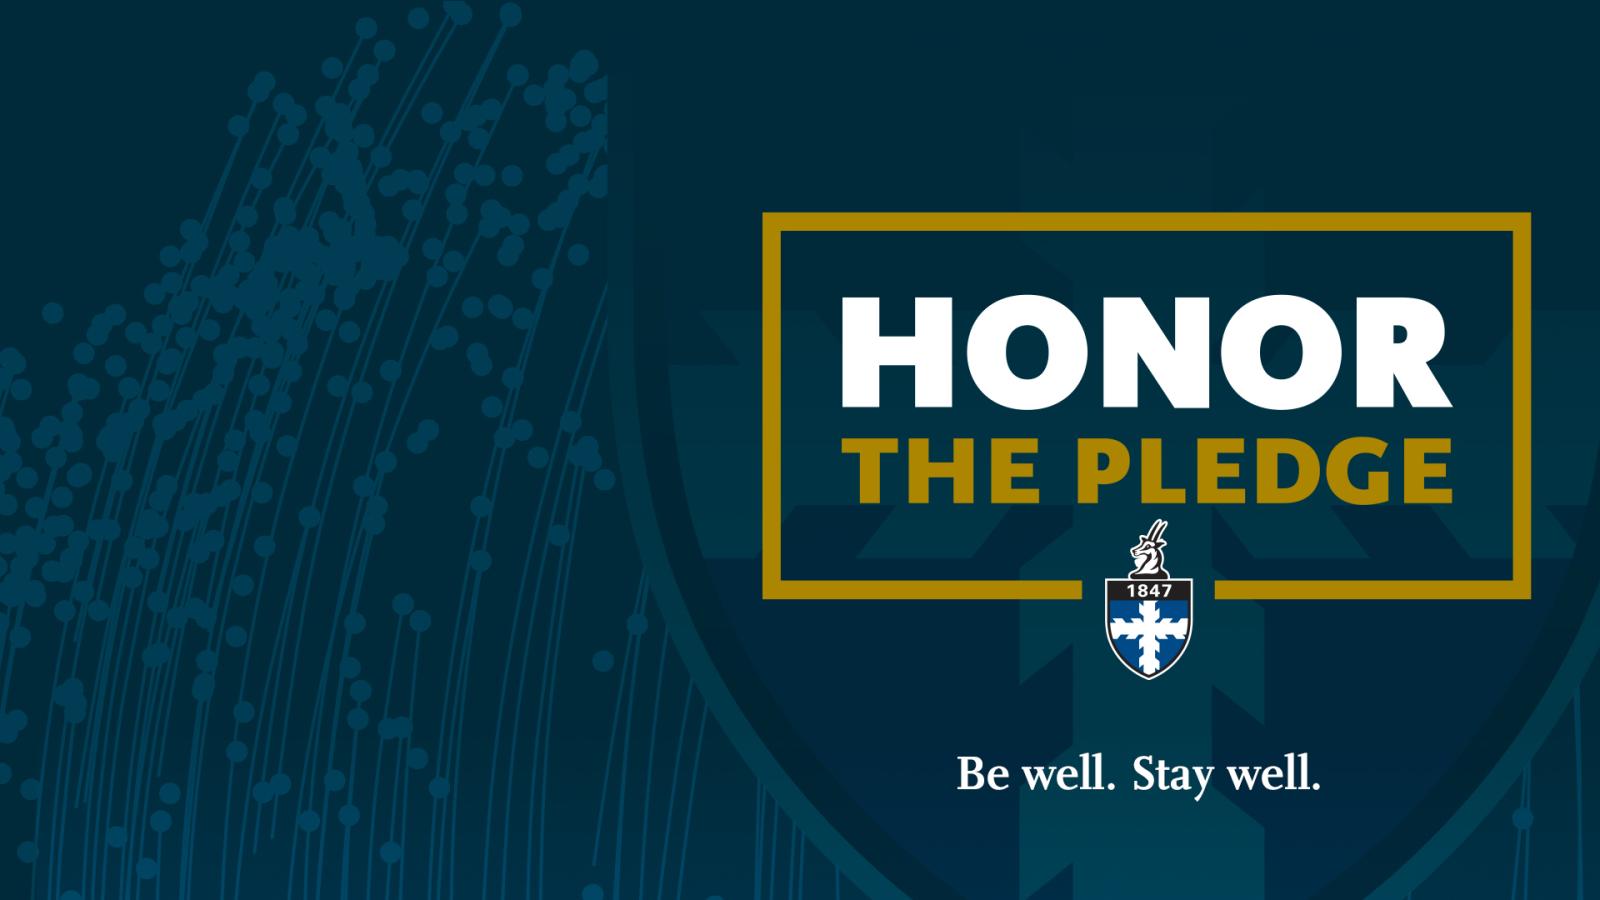 Text that says, "Honor the pledge. Be well. Stay well." on blue background.